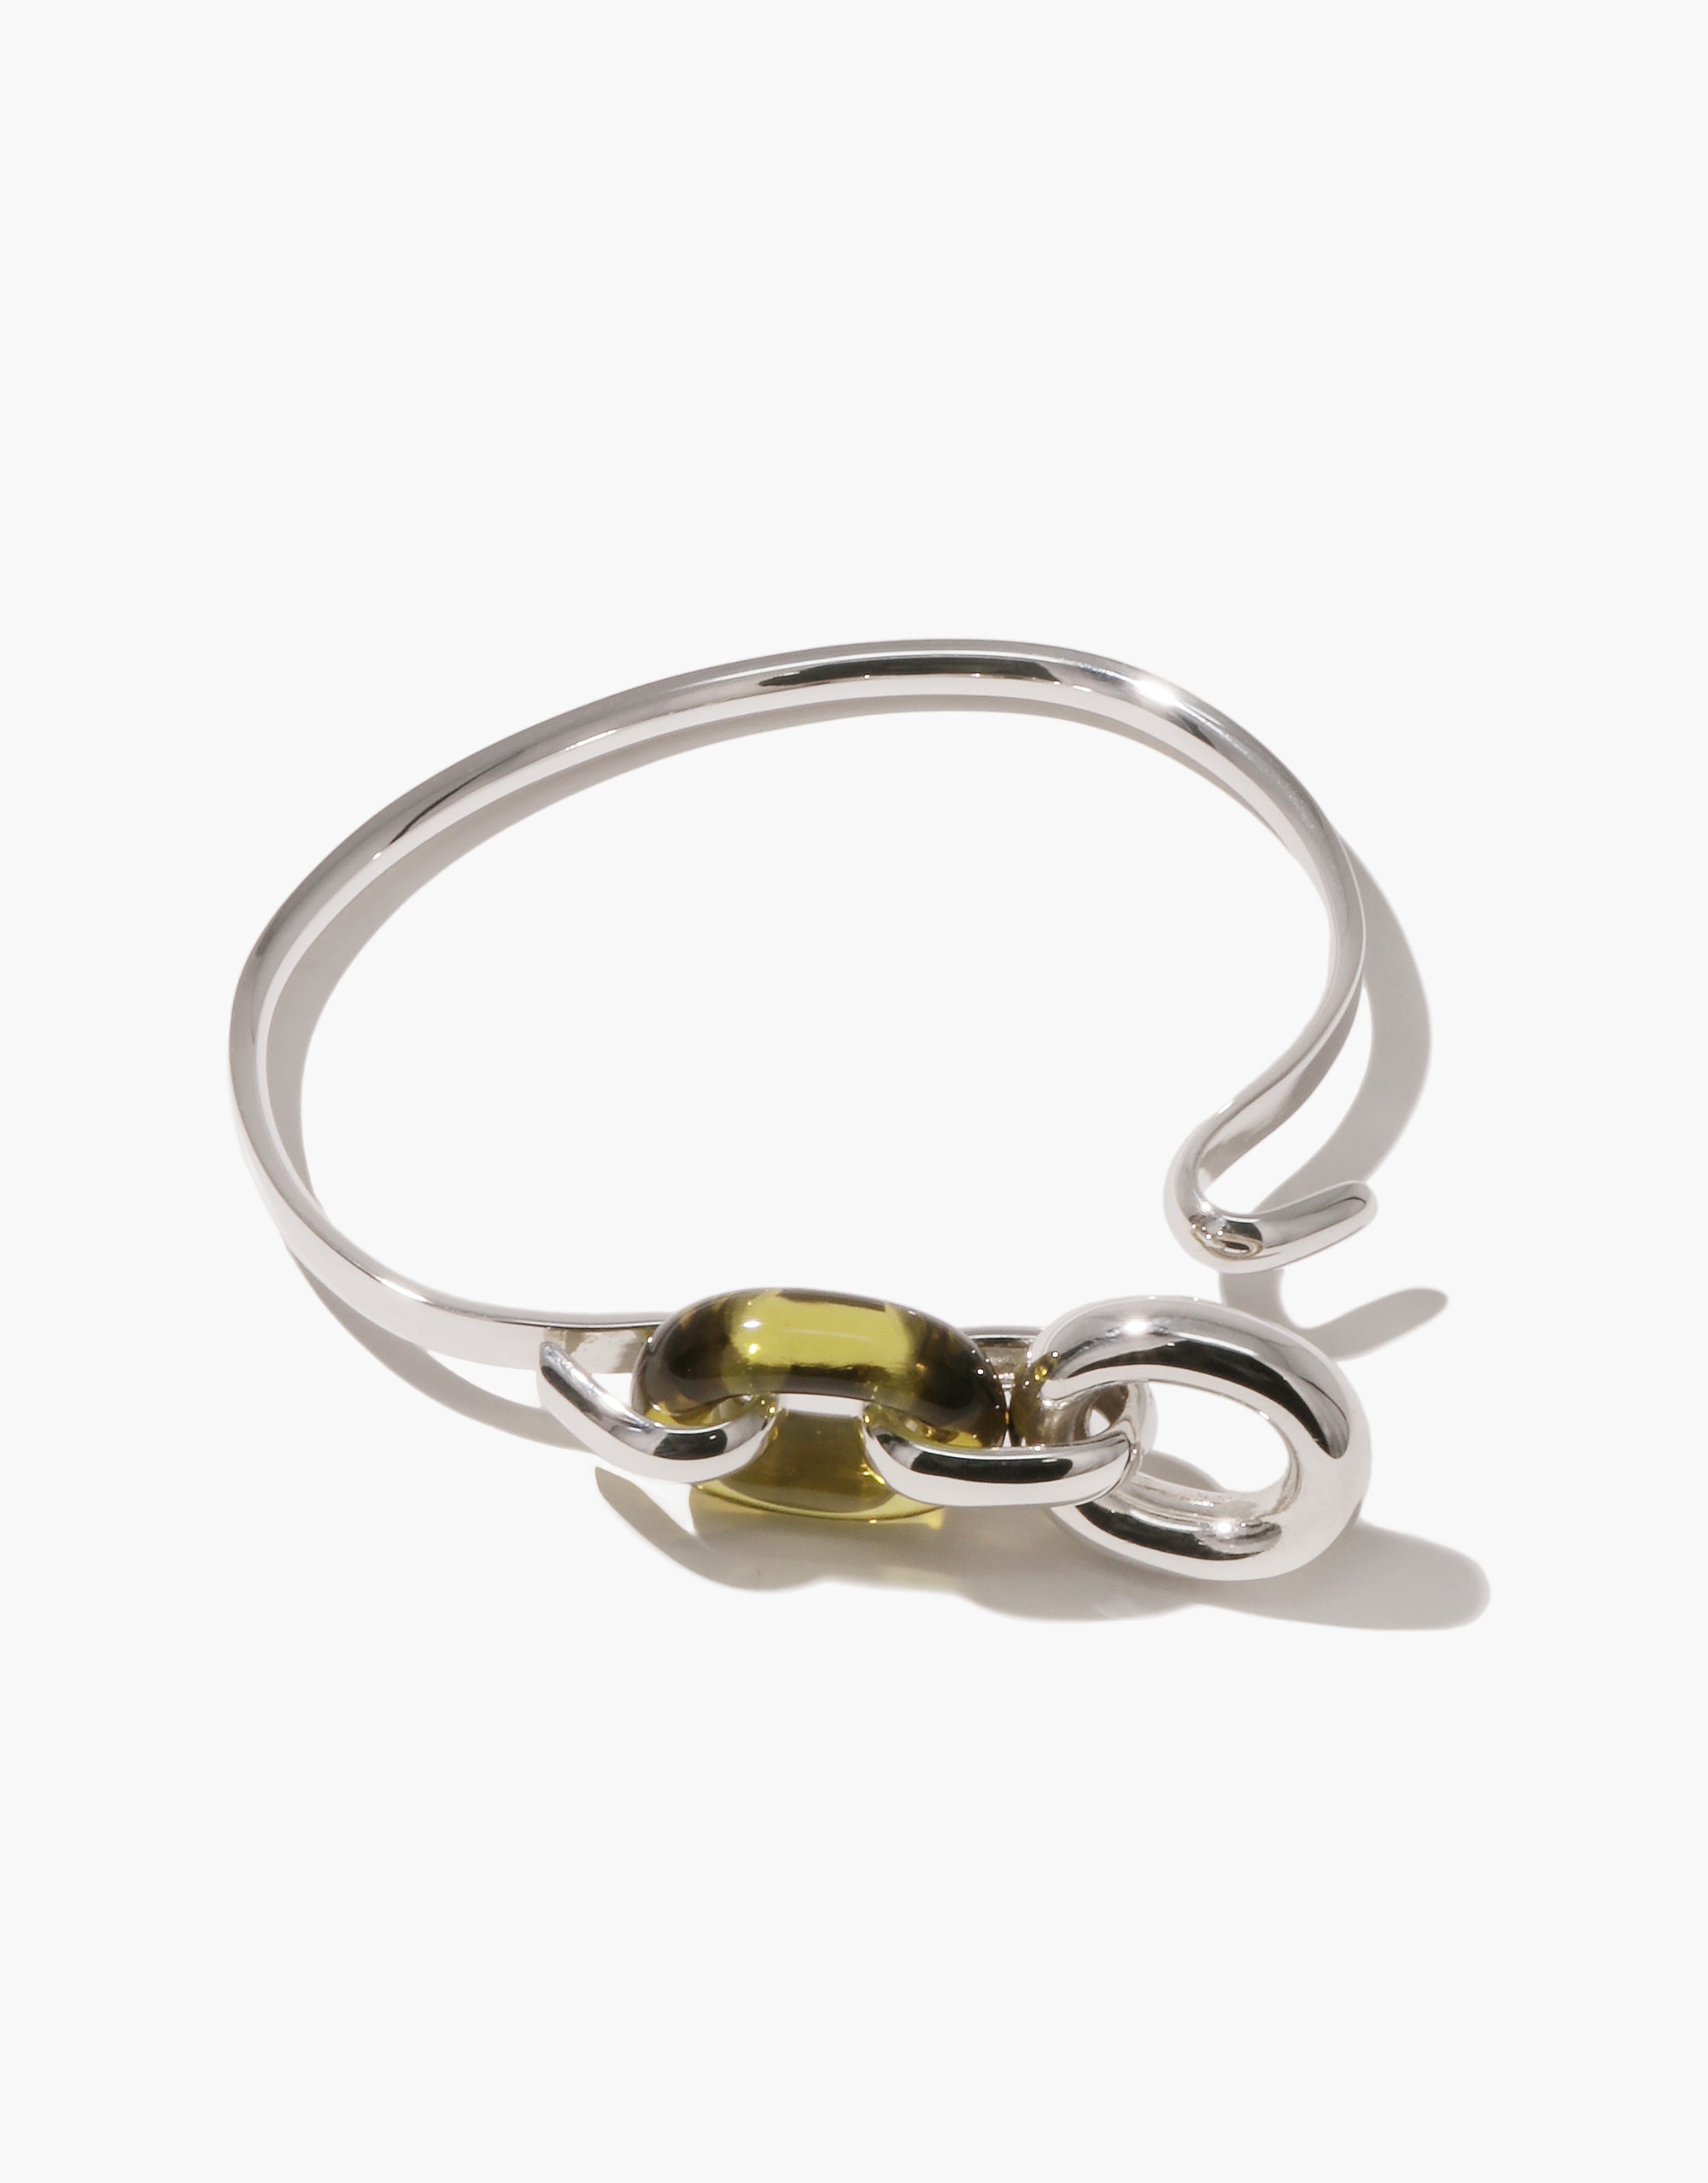 Connected Loop Bracelet | Mixed Metal & Glass Metal + Glass / Sterling Silver / S/M